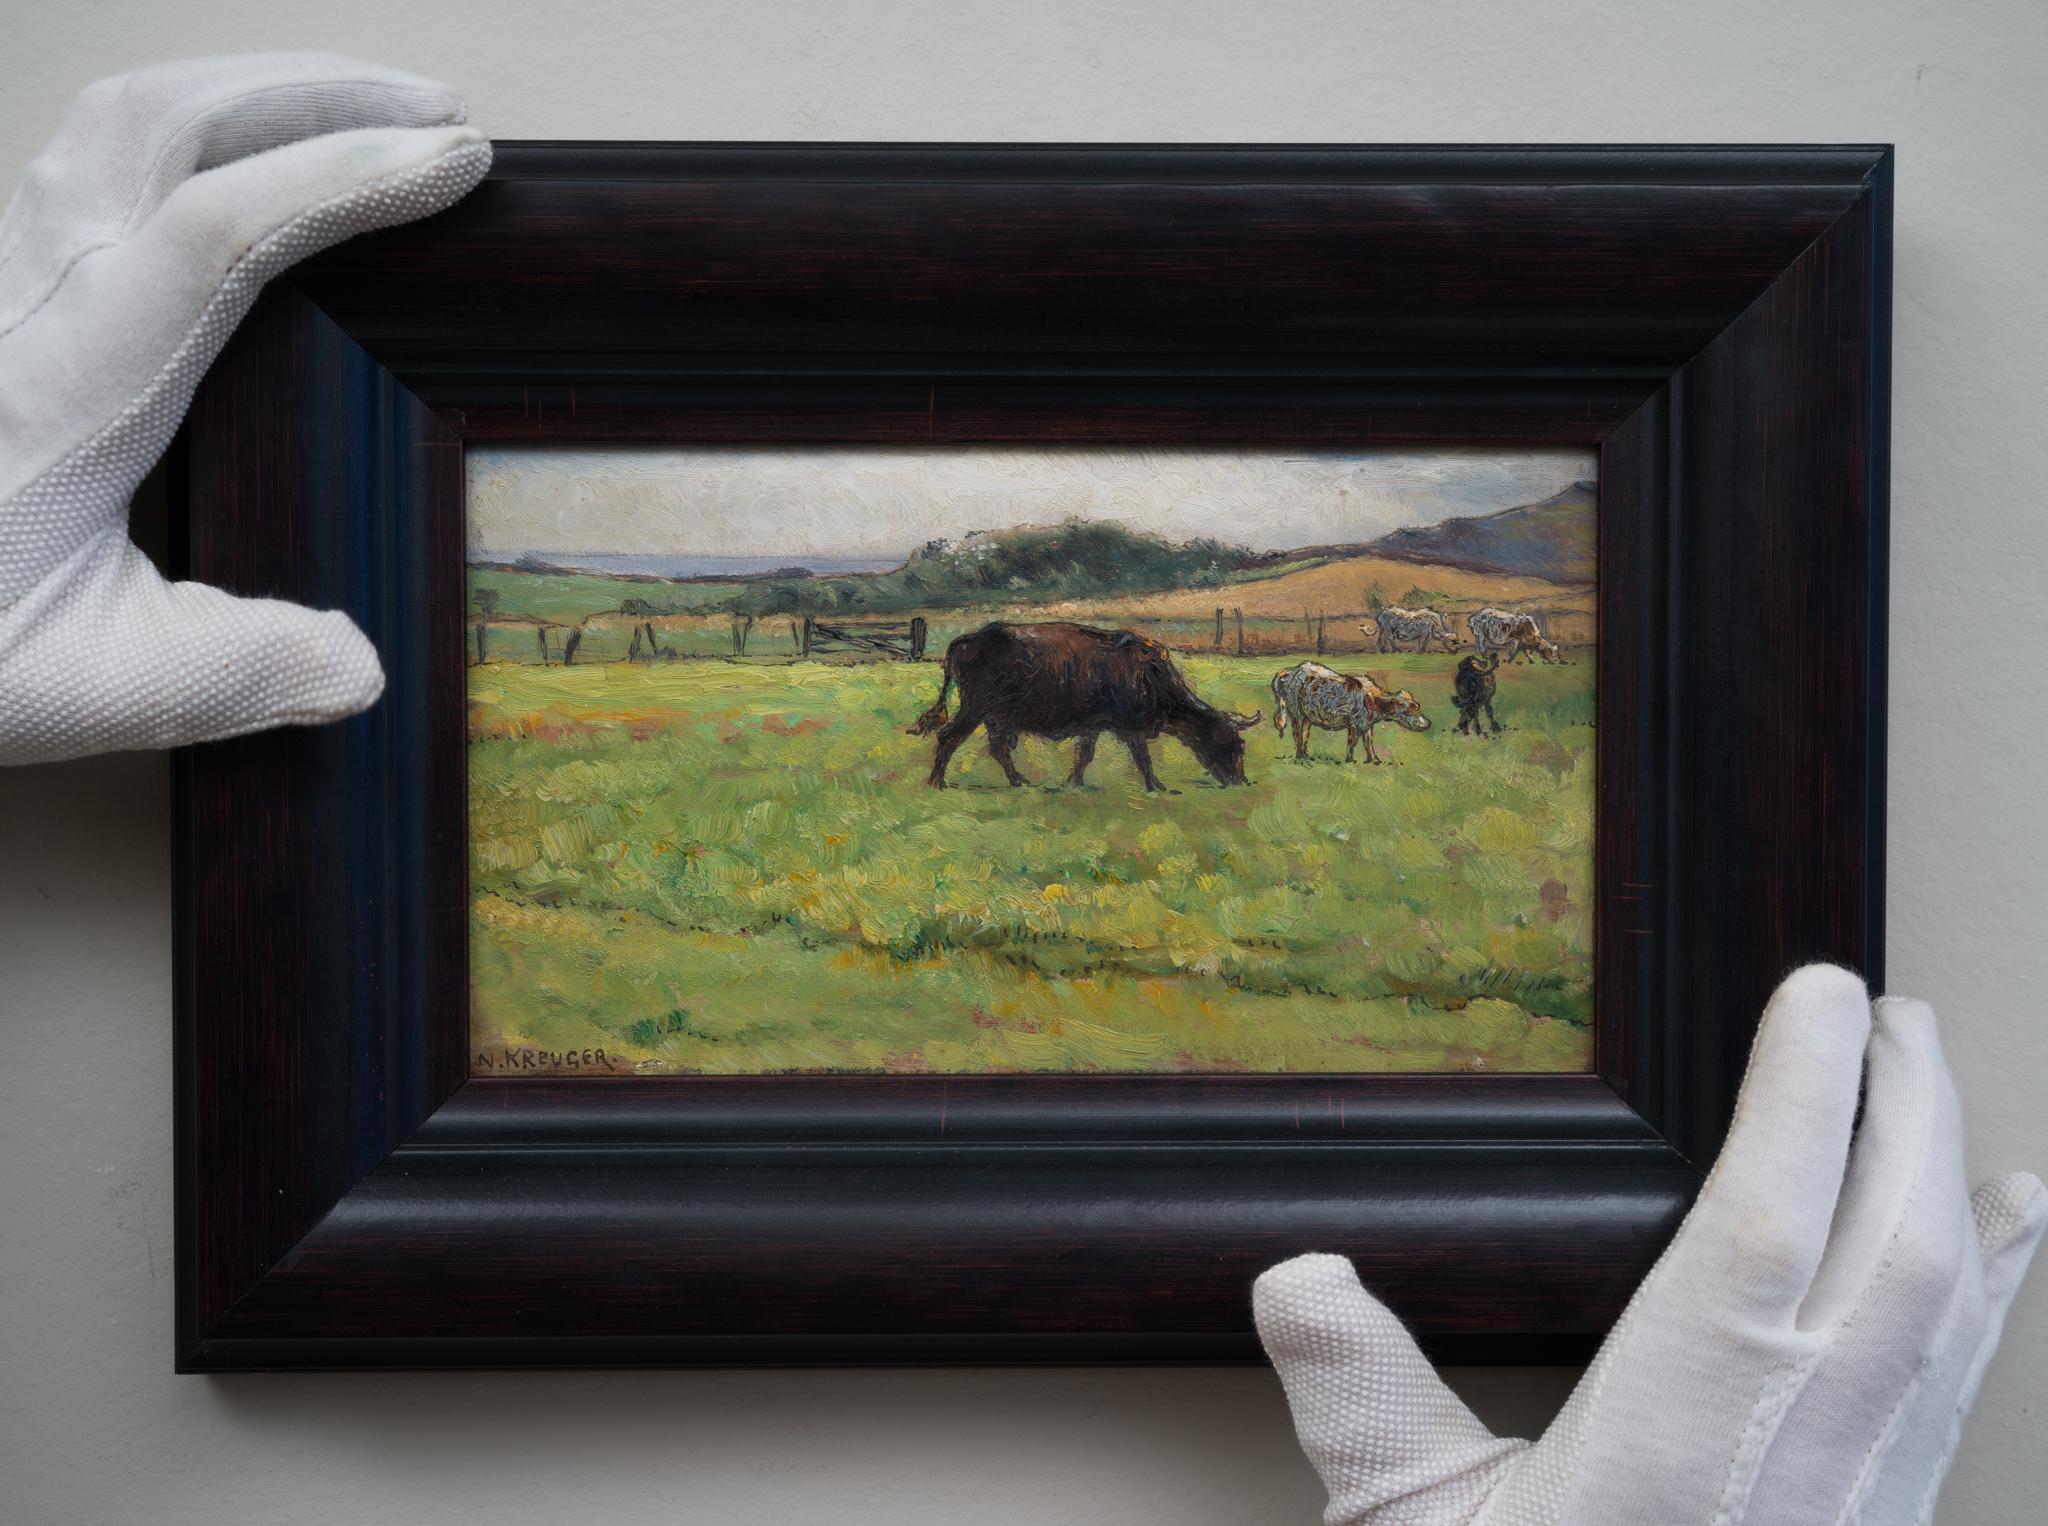 This exquisite oil painting on panel, measuring 13.5 x 24.5 cm, is a beautiful piece by Nils Kreuger, a distinguished Swedish painter. The artwork depicts five cattle grazing on a green meadow, a scene that encapsulates the tranquil beauty of rural